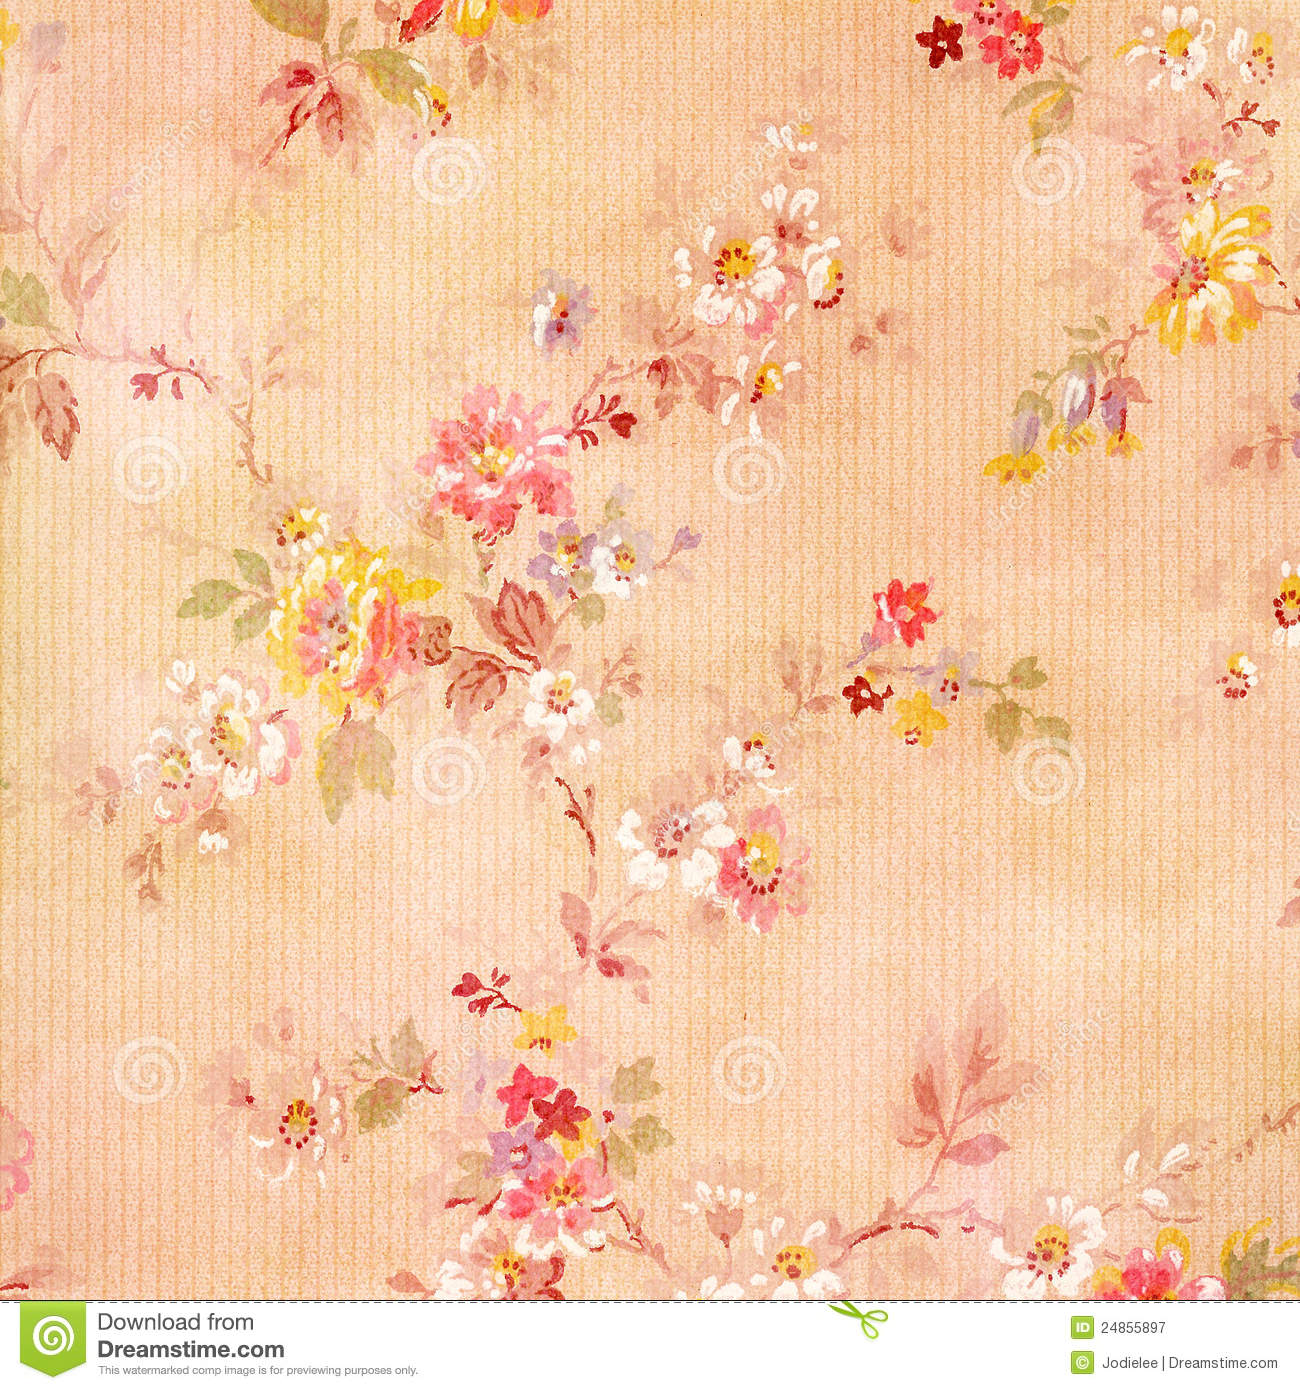 Shabby Chic Vintage Antique Rose Floral Wallpaper Royalty Free